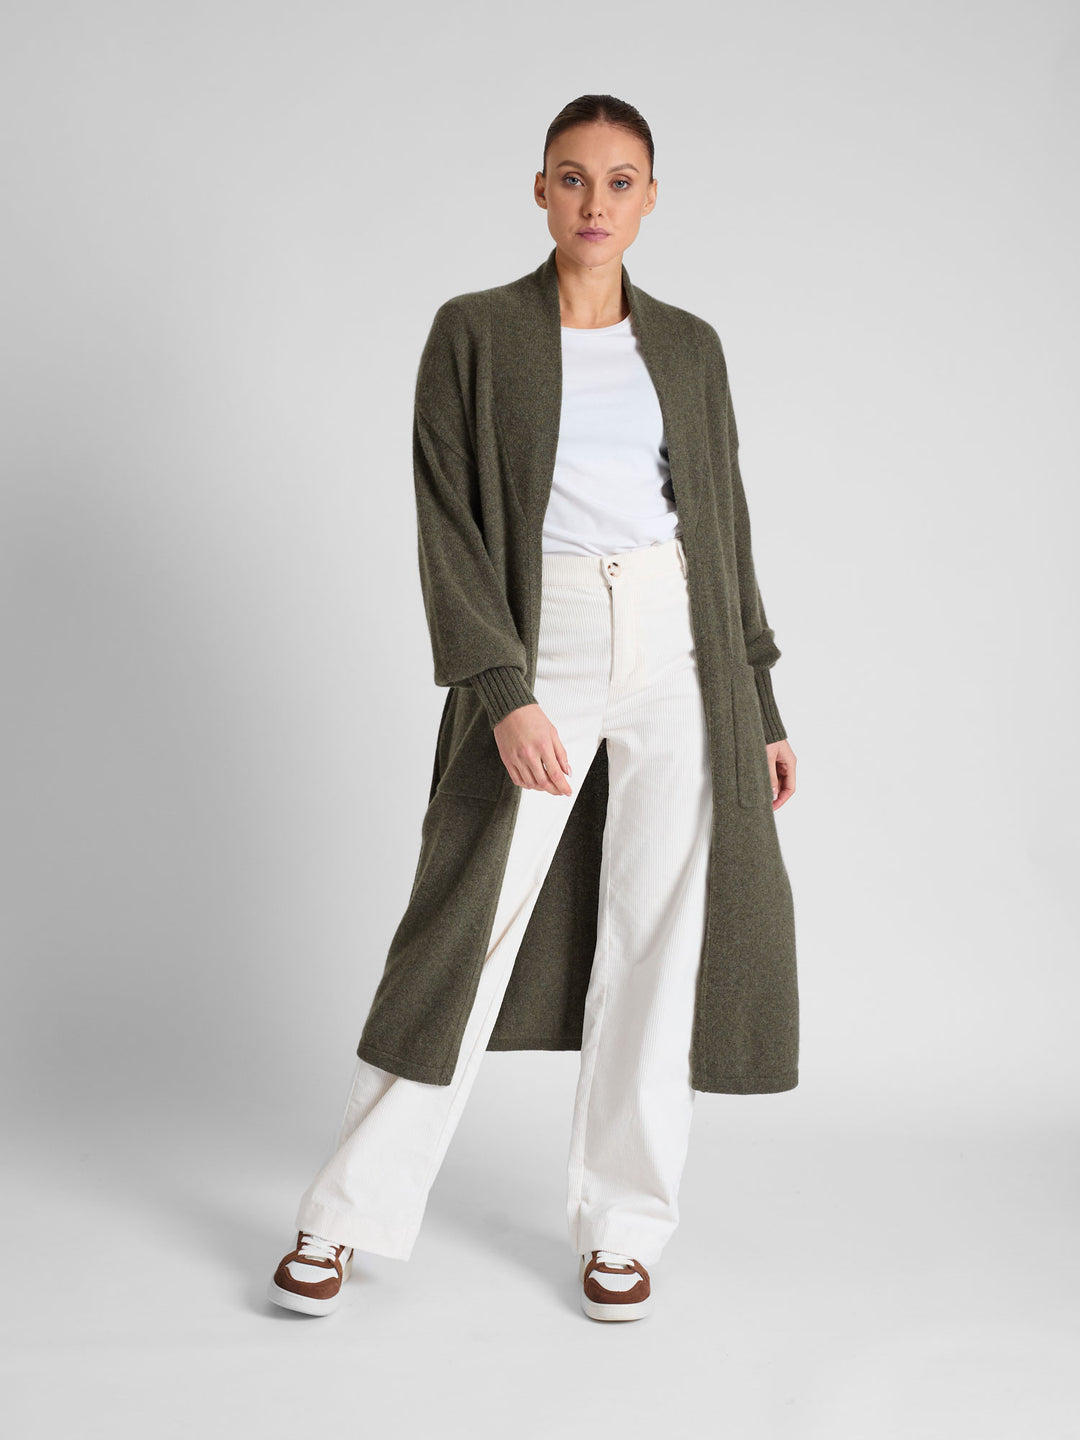 Cashmere coat "Trench" in 100% pure cashmere. Scandinavian design by Kashmina. Color: Army.